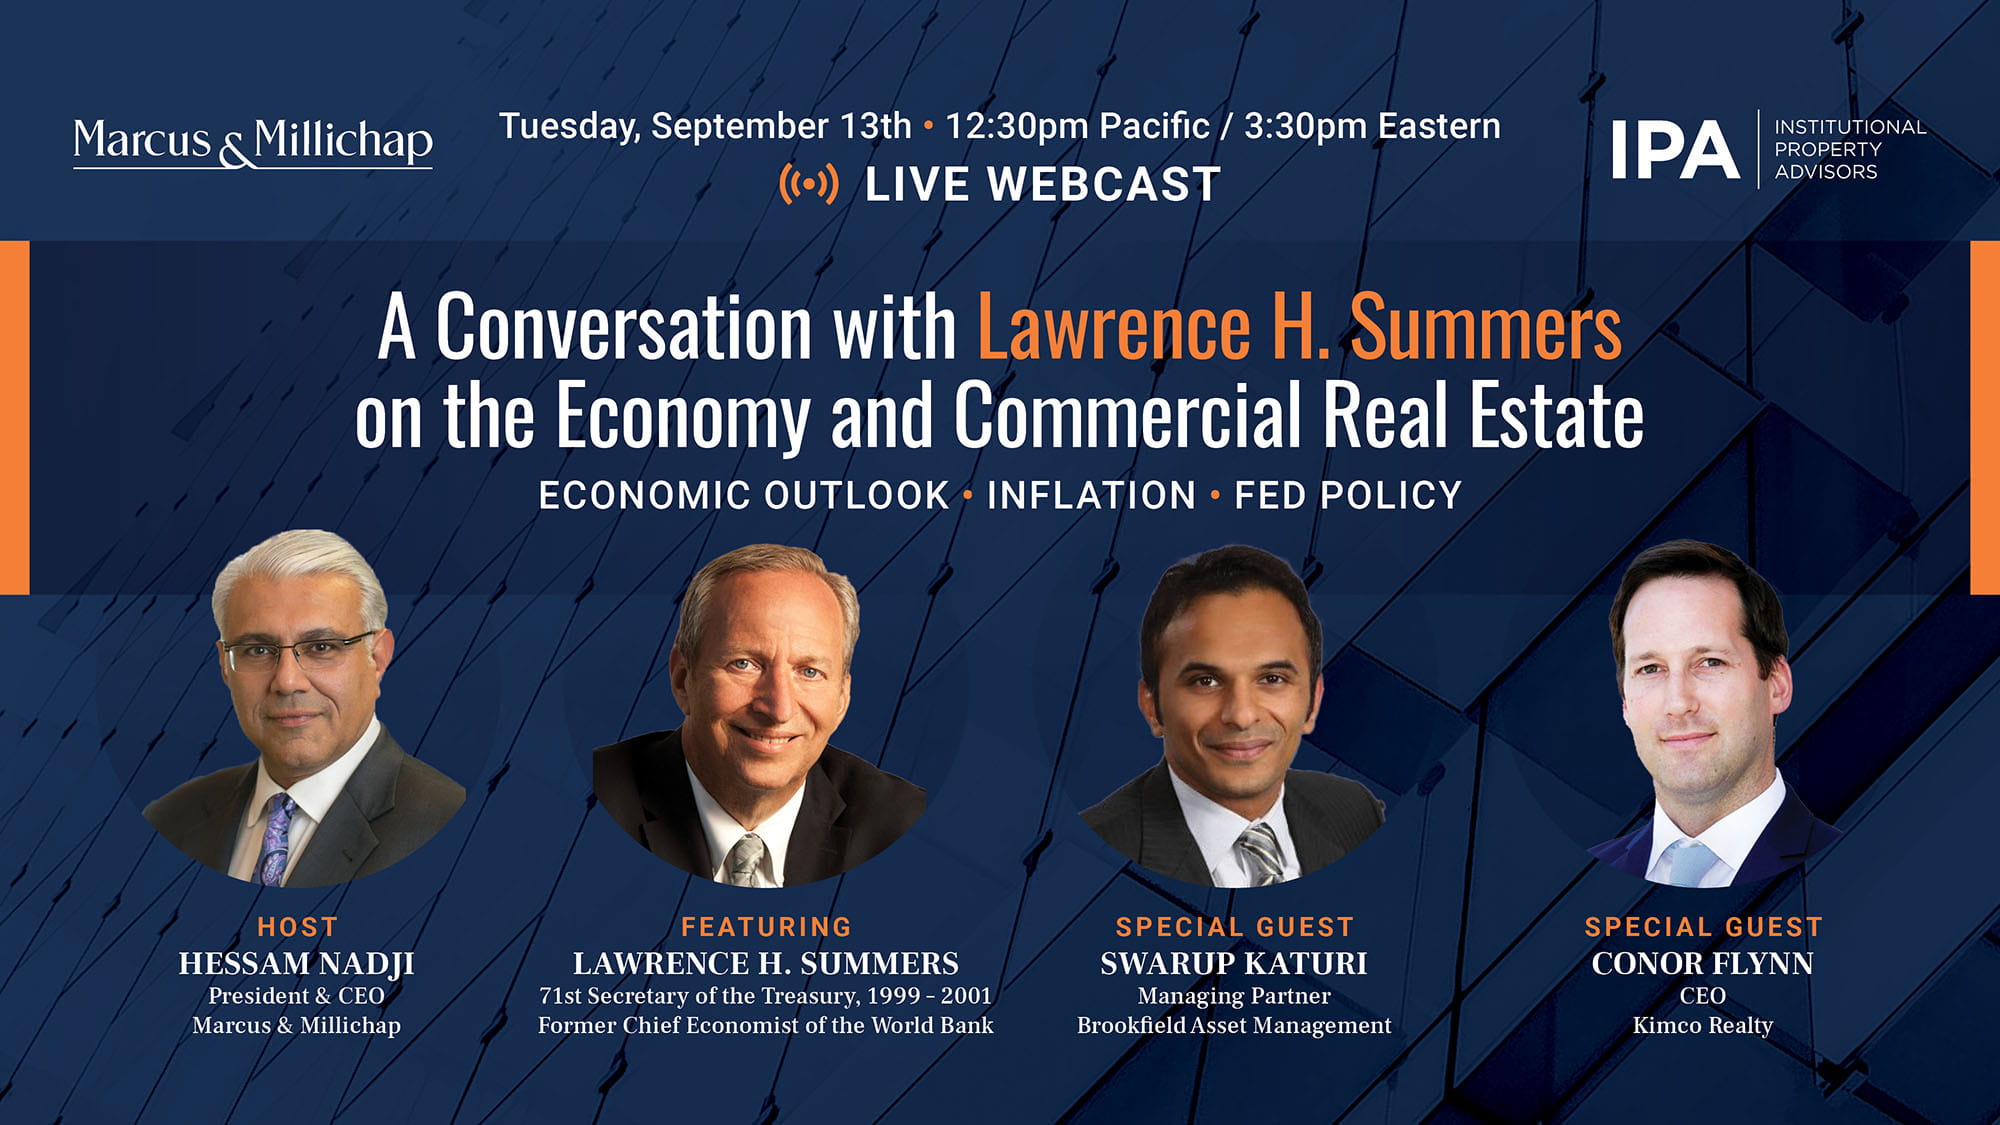 Live Webcast - Conversation with Lawrence H. summers on the Economy and Commercial Real Estate